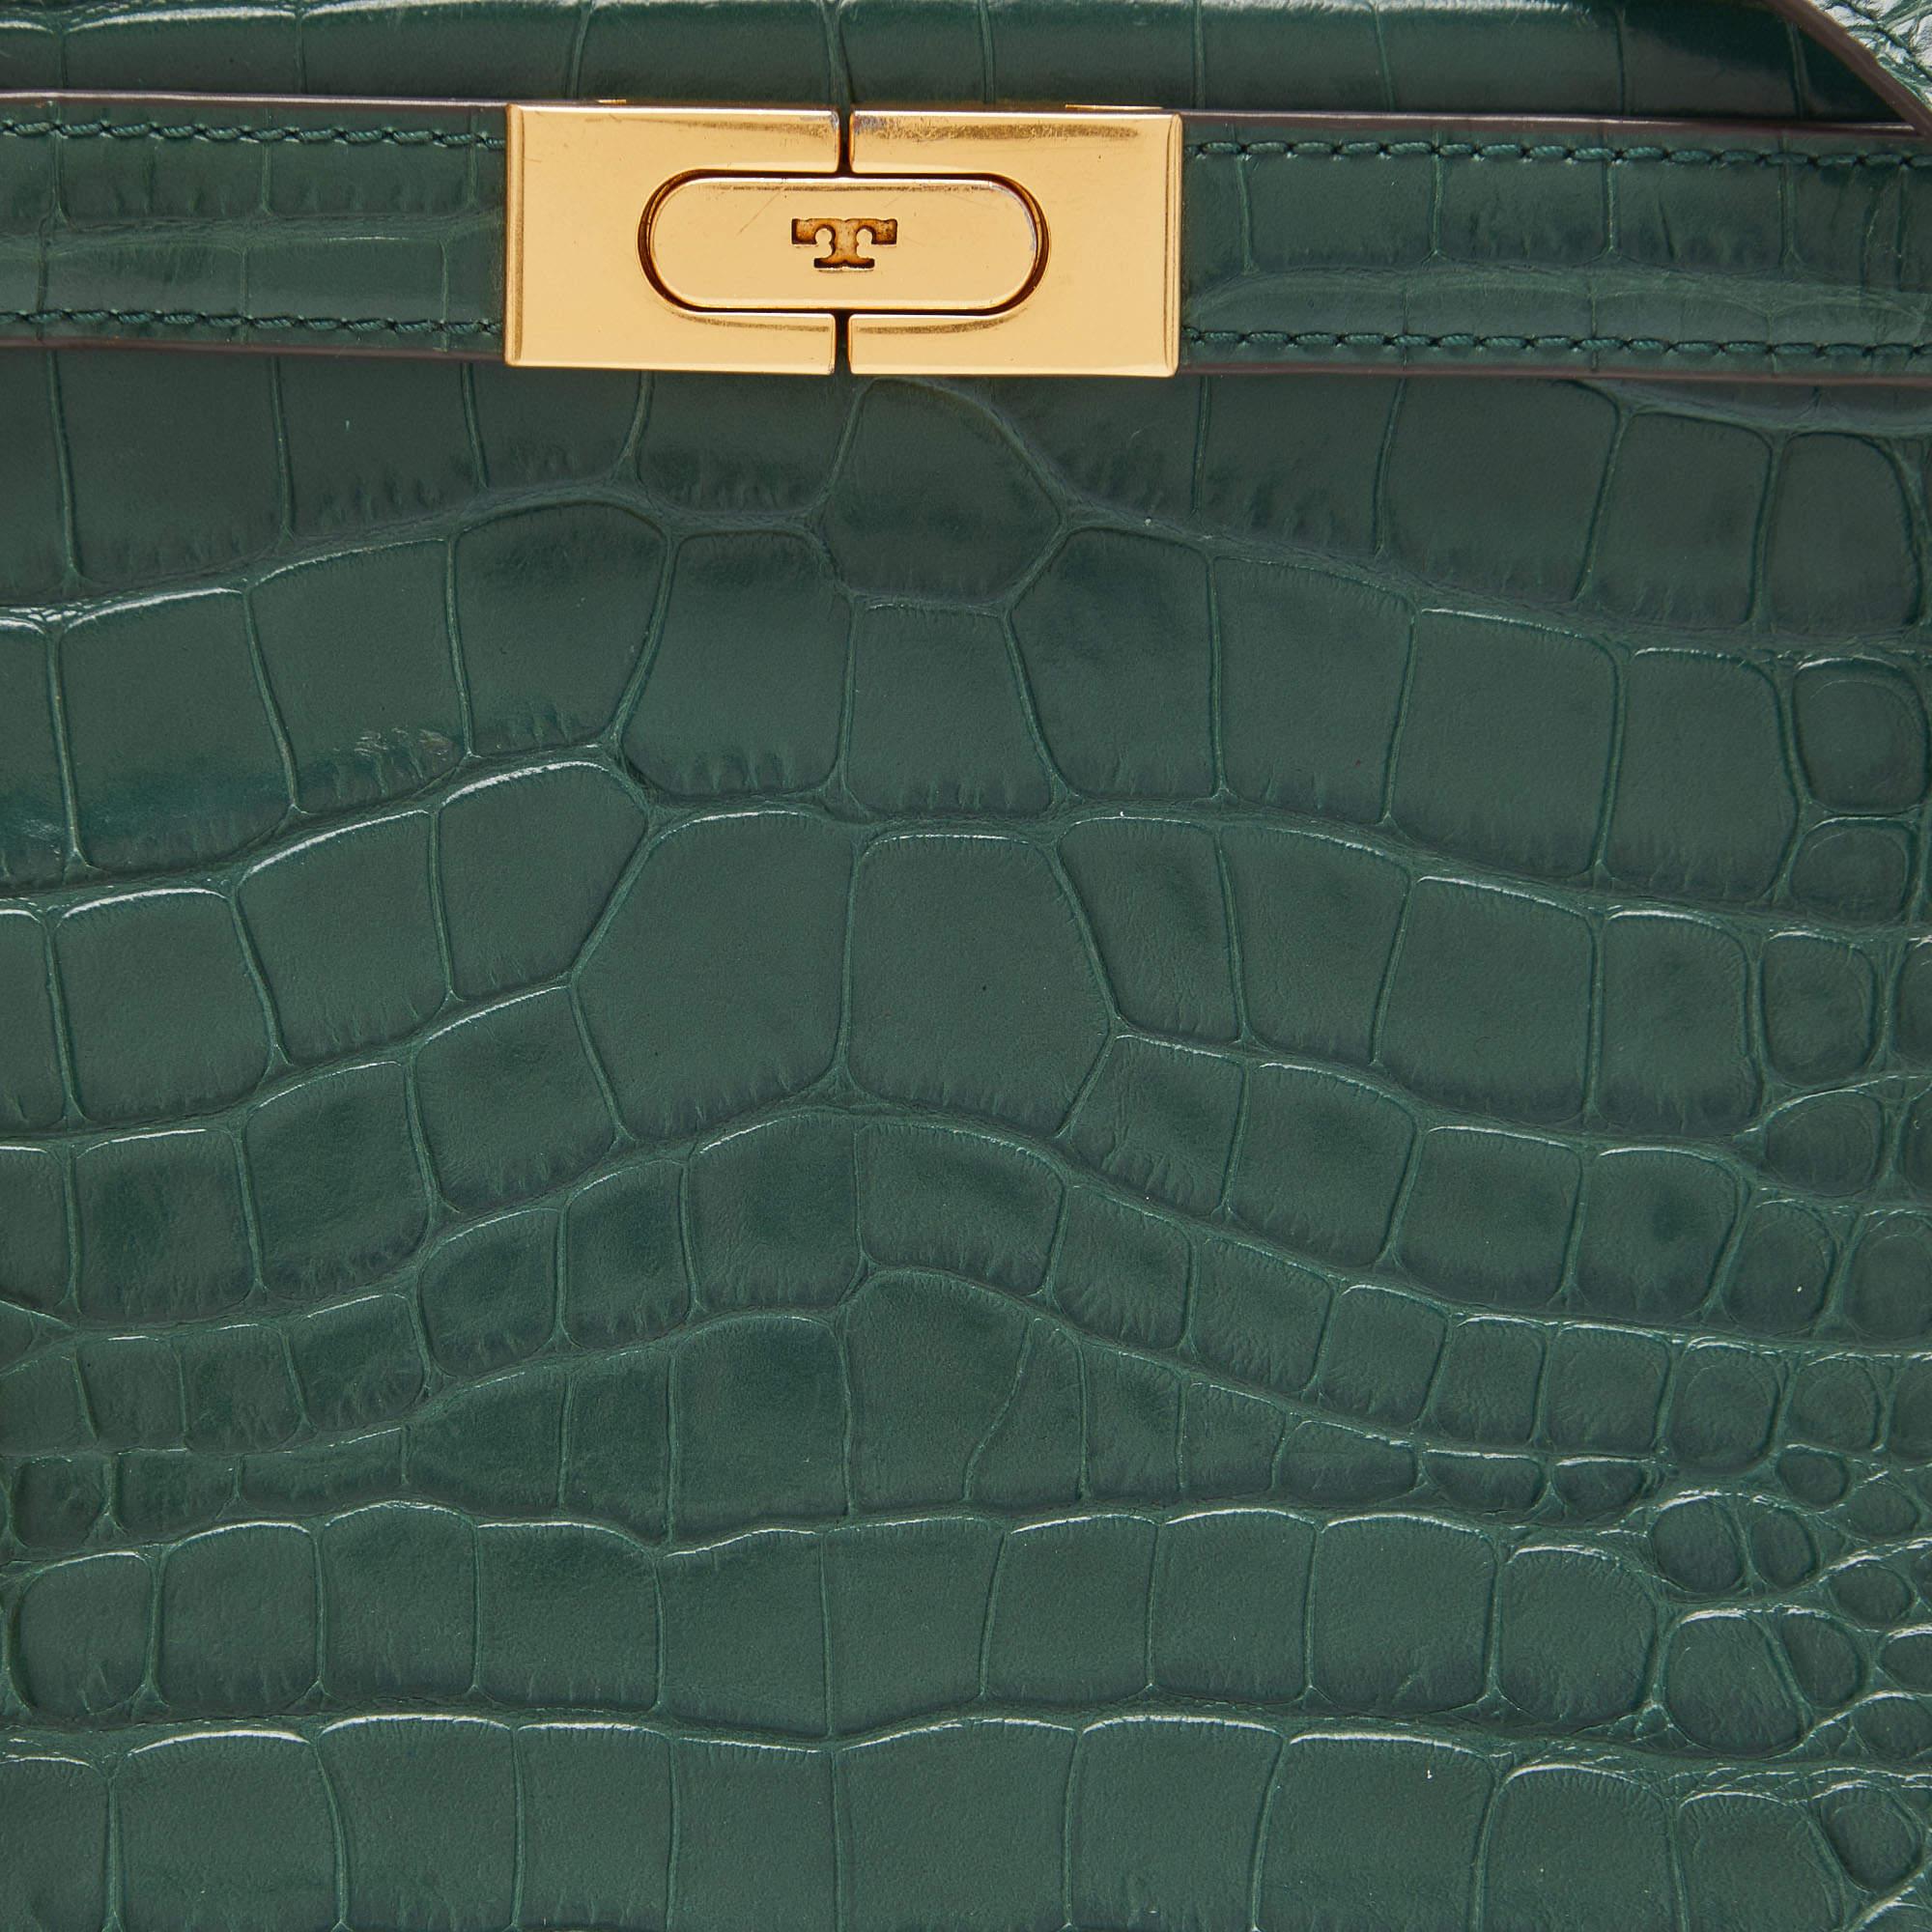 Tory Burch Green Croc Embossed Leather Lee Radziwill Top Handle Bag 6